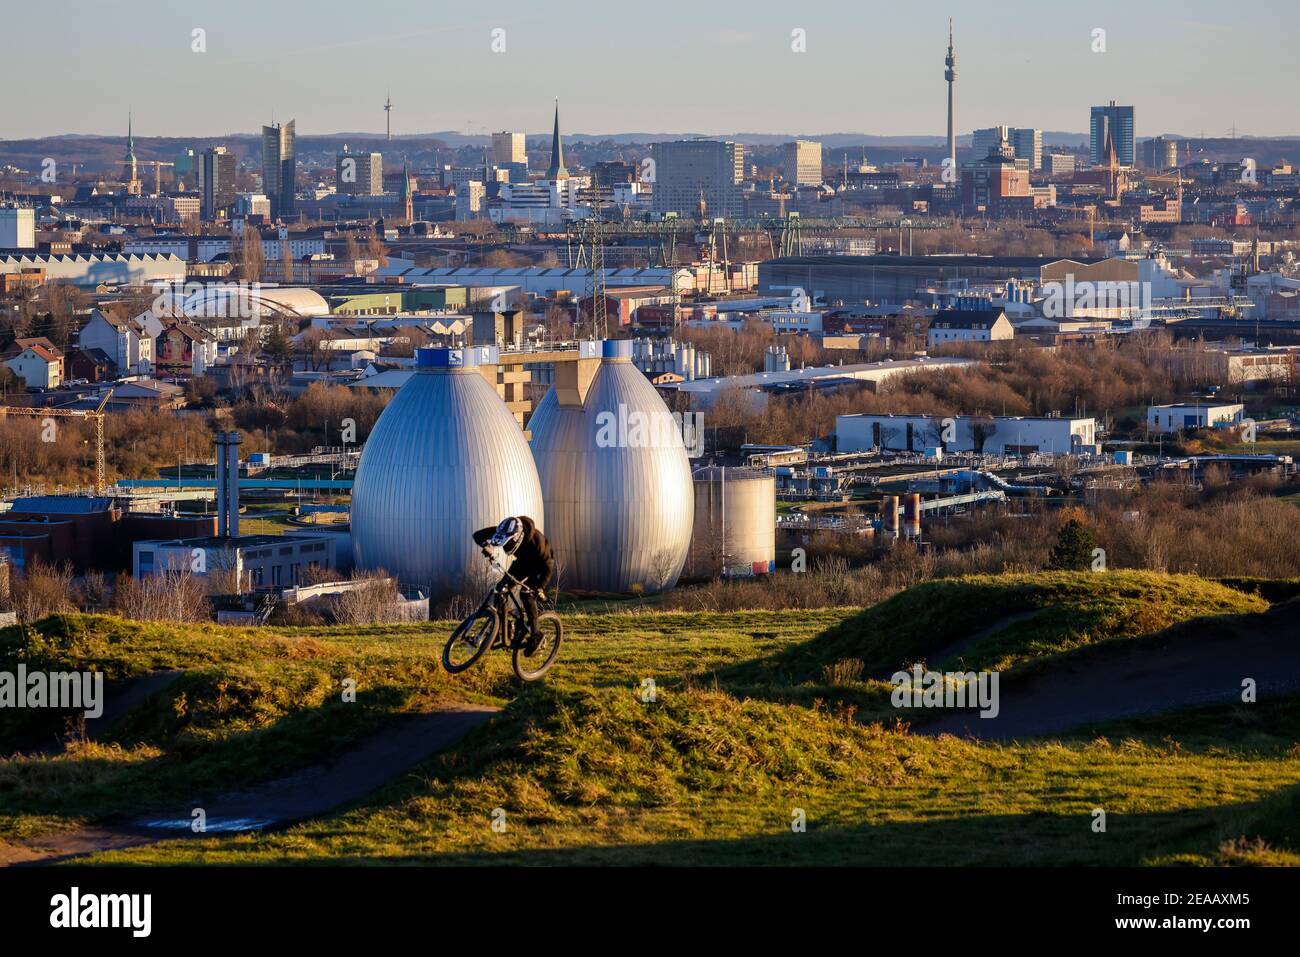 Dortmund, Ruhr area, North Rhine-Westphalia, Germany - city panorama Dortmund, mountain bike riders, mountain bike arena on the Deusenberg in front of the skyline of Dortmund city center, in the back the Florian and Dortmund TV tower, in front the digestion towers of the Emscher sewage treatment plant in Dortmund Deusen, the sewage treatment plant is now receiving a 4th stage which also frees the treated wastewater from drug residues. Stock Photo